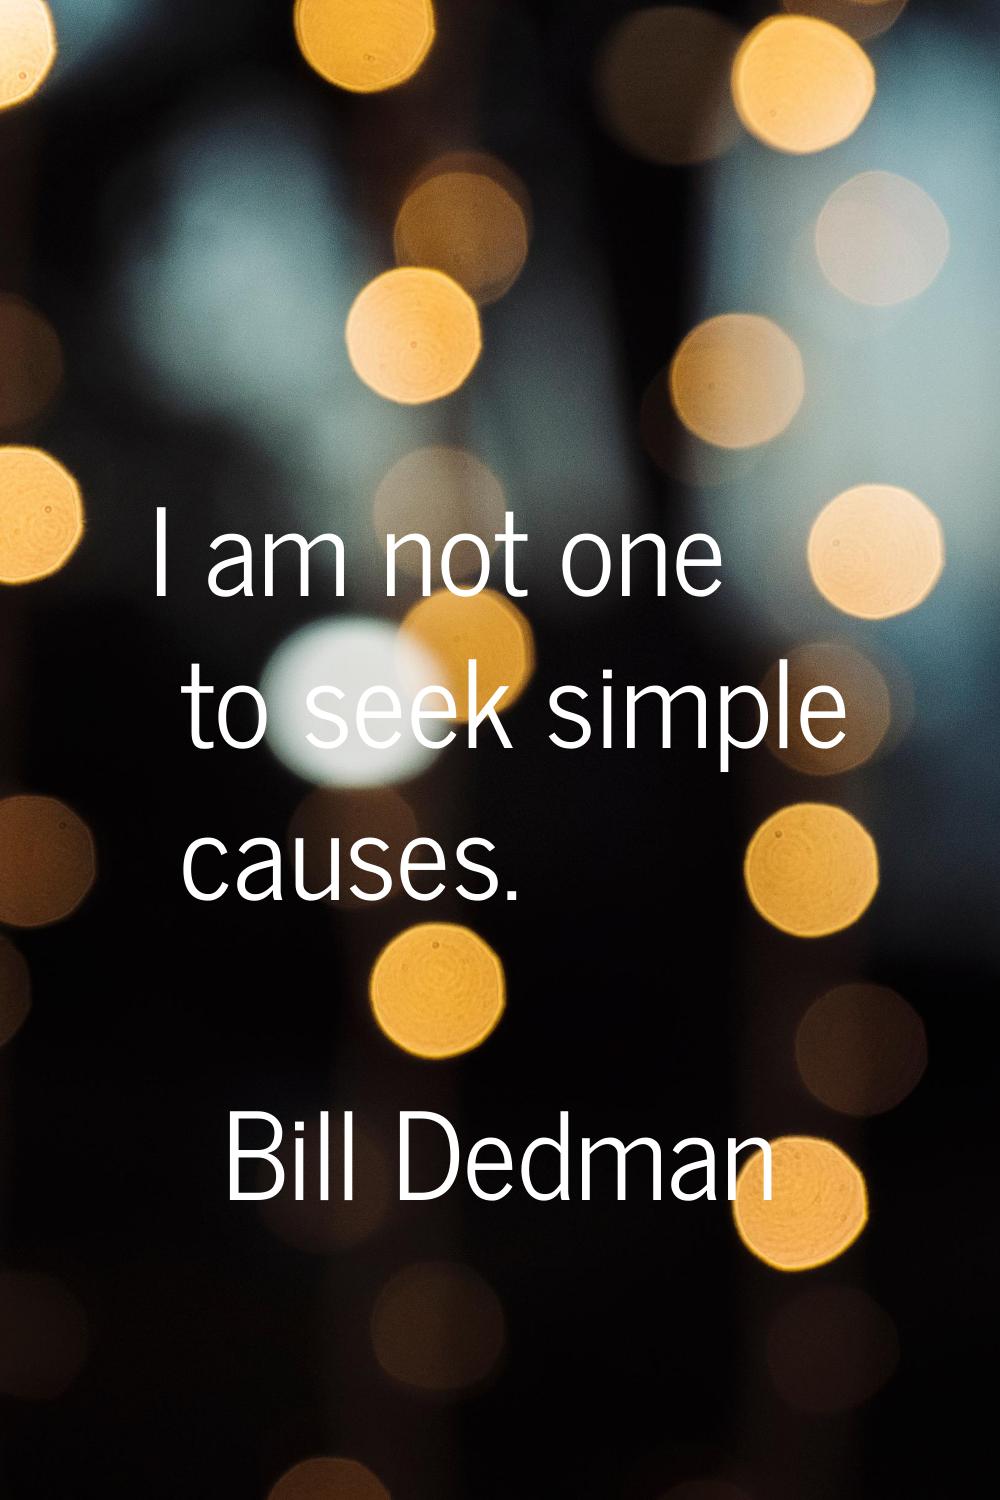 I am not one to seek simple causes.